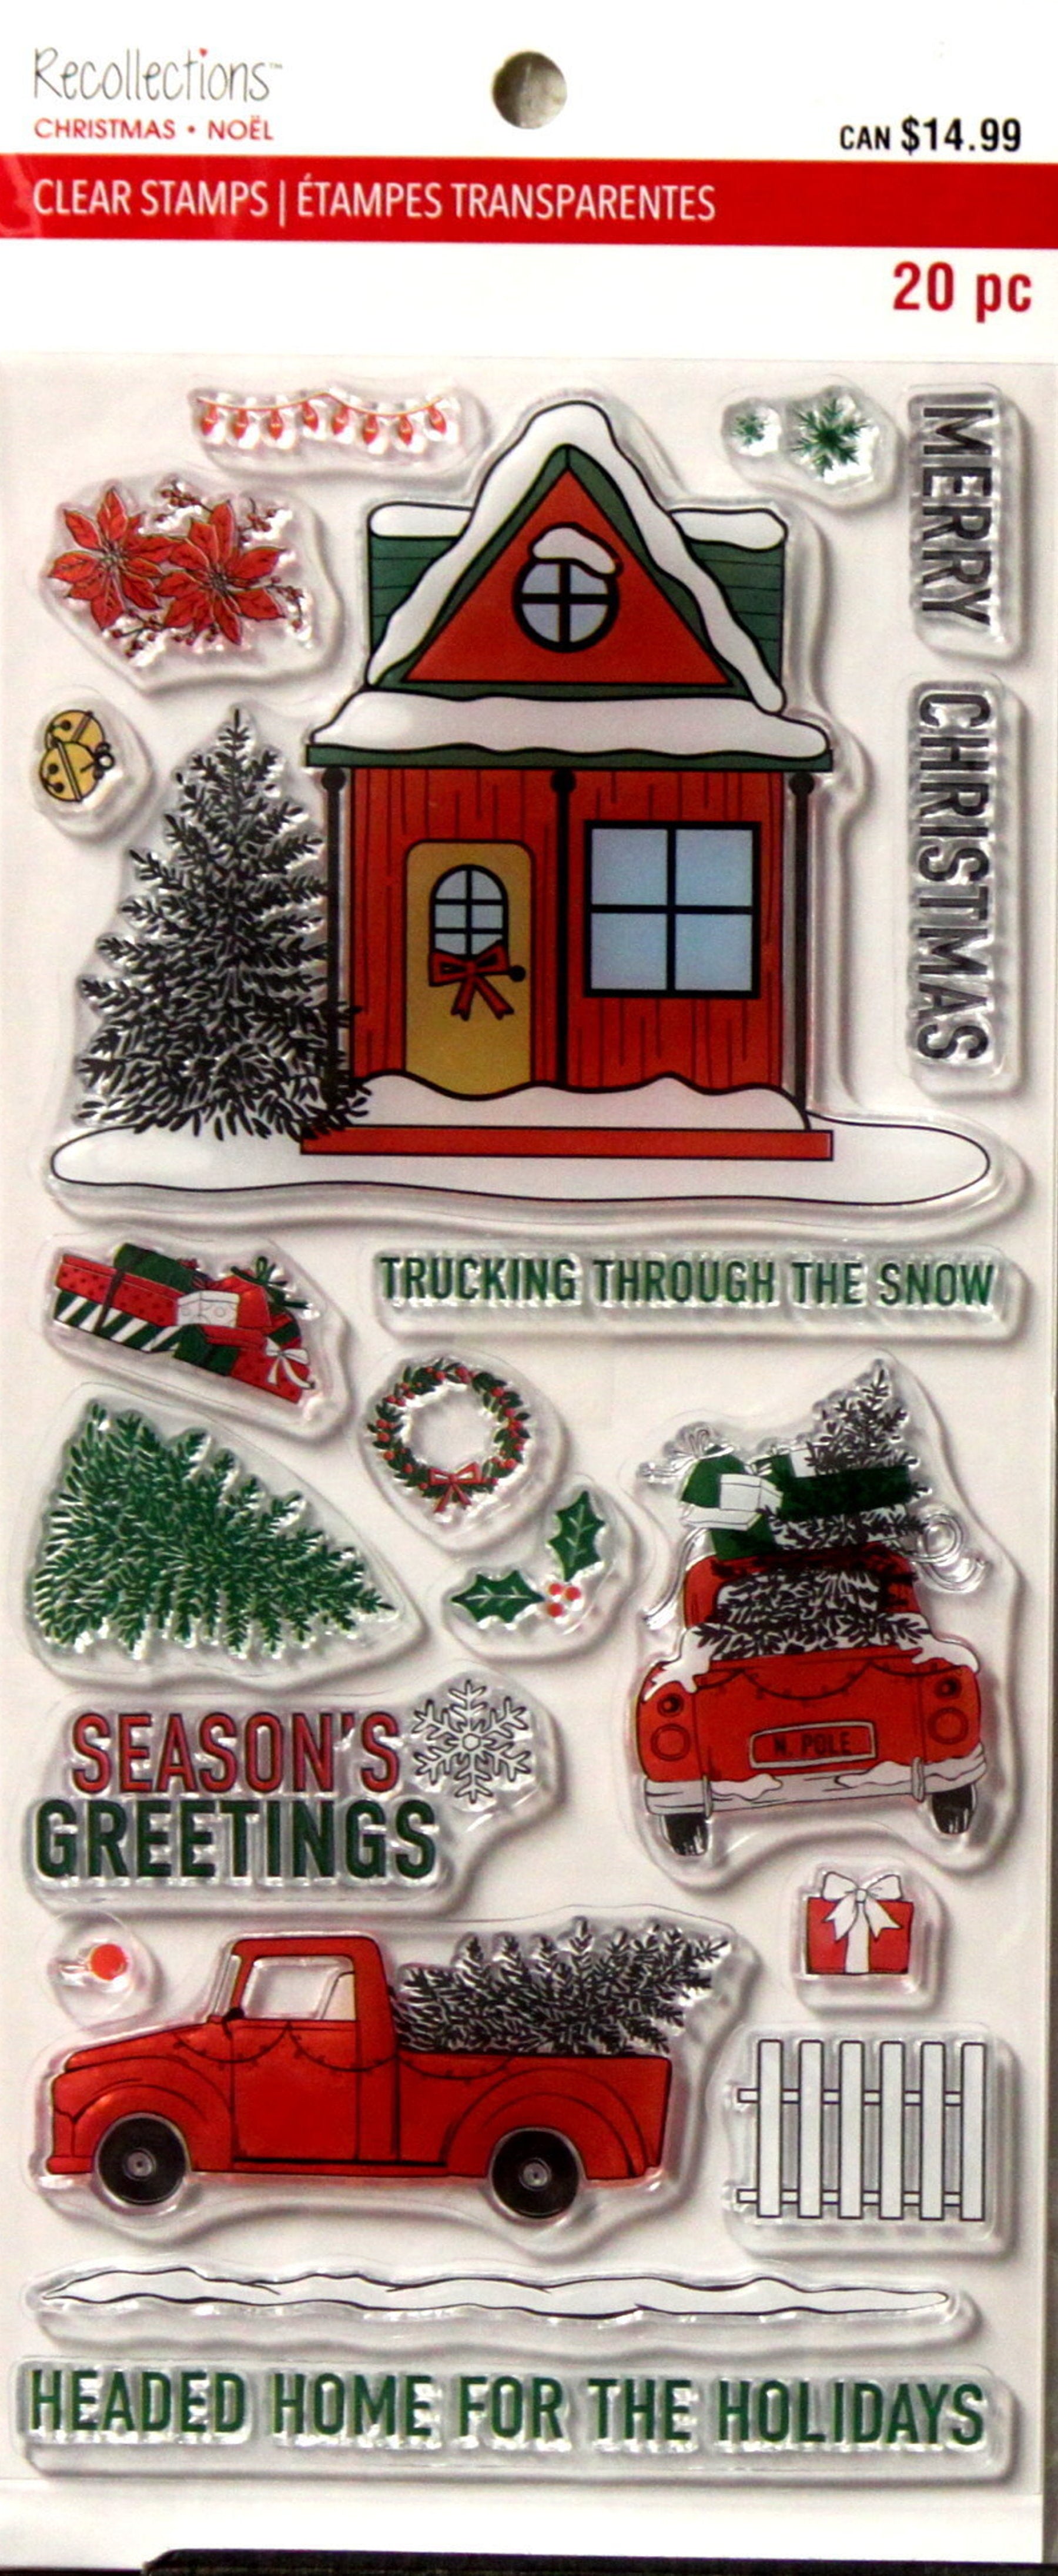 Recollections Christmas Noel Holiday Sentiments & Icons Clear Stamps Collection